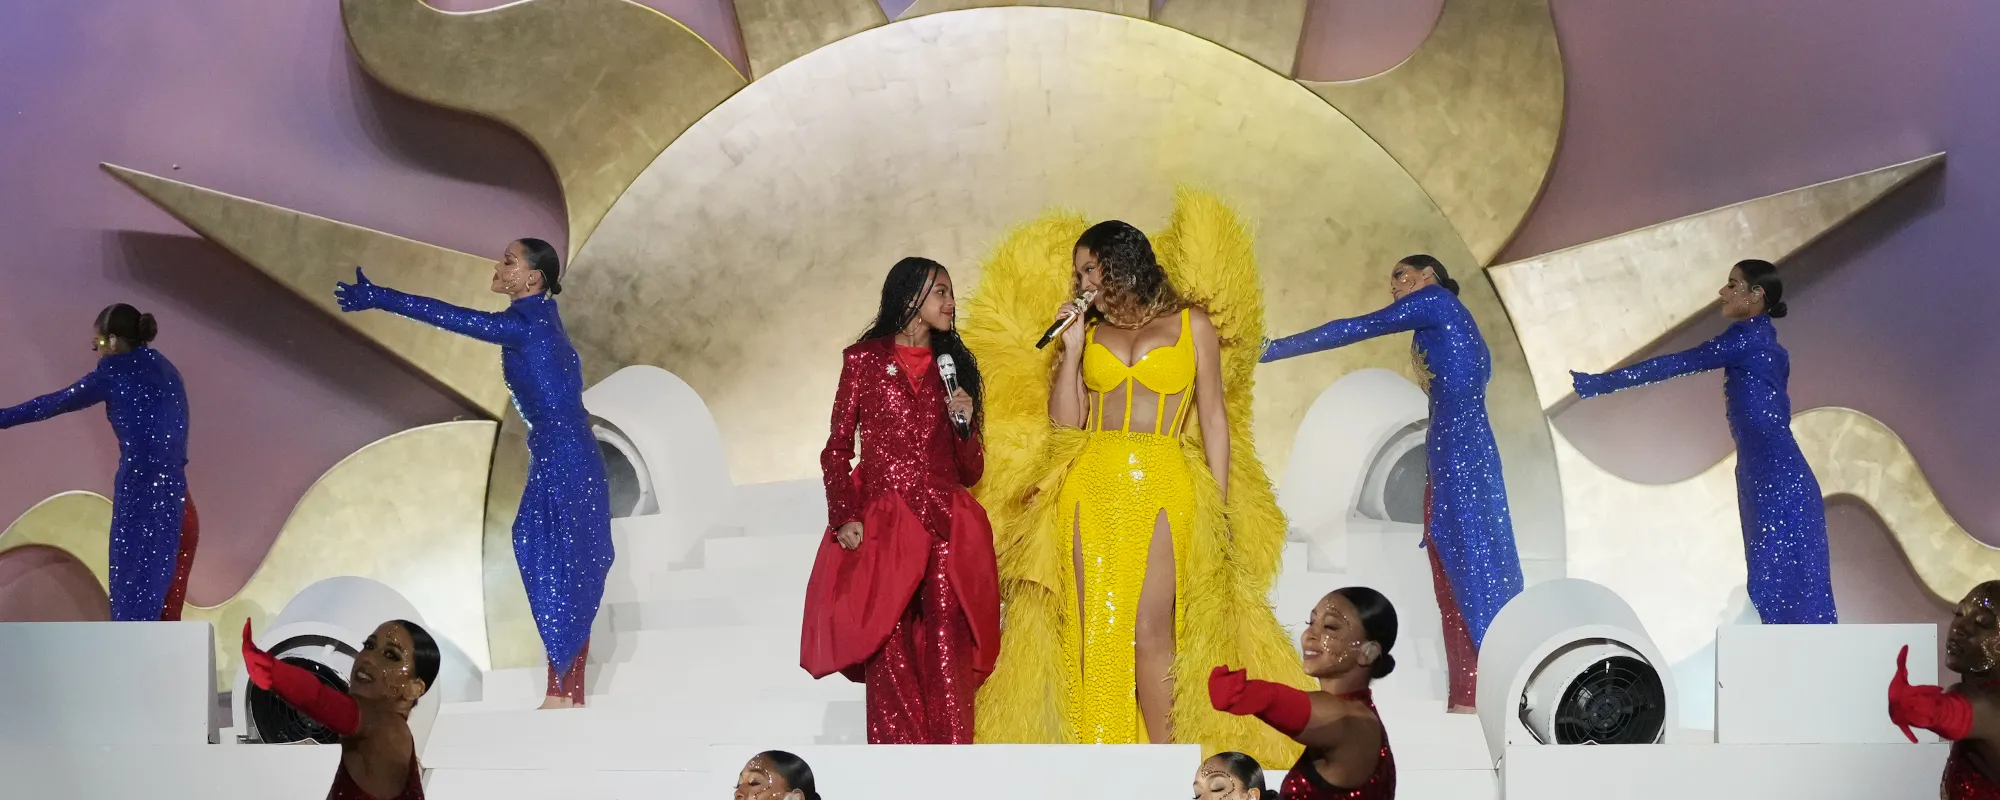 Beyoncé Takes the Stage with Daughter Blue Ivy in Dubai